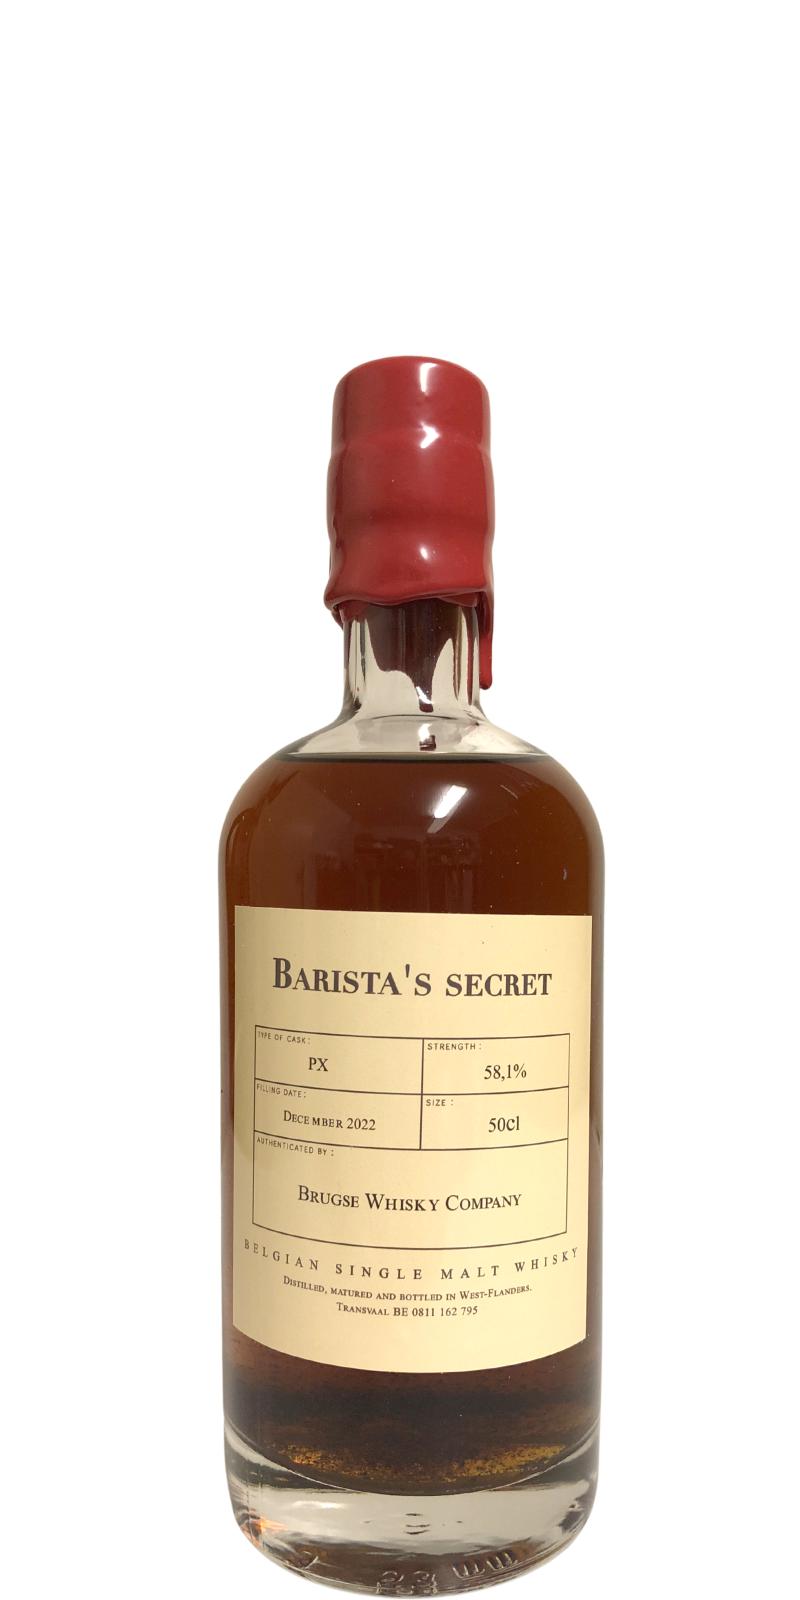 Bruges Whisky Company 03-year-old BaSec